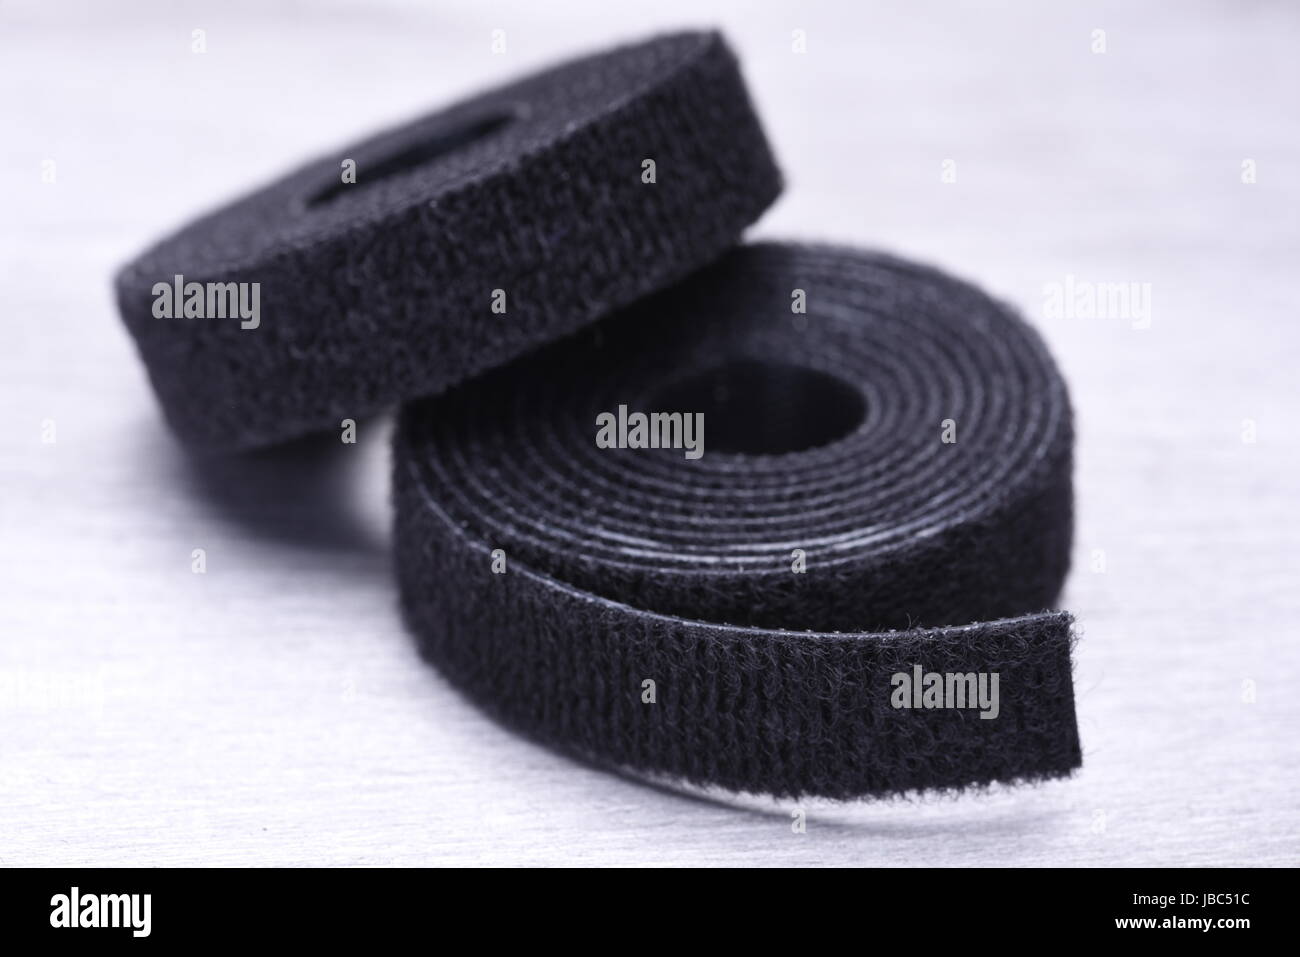 Roll of Velcro Tape on Gray Metal Surface Stock Photo